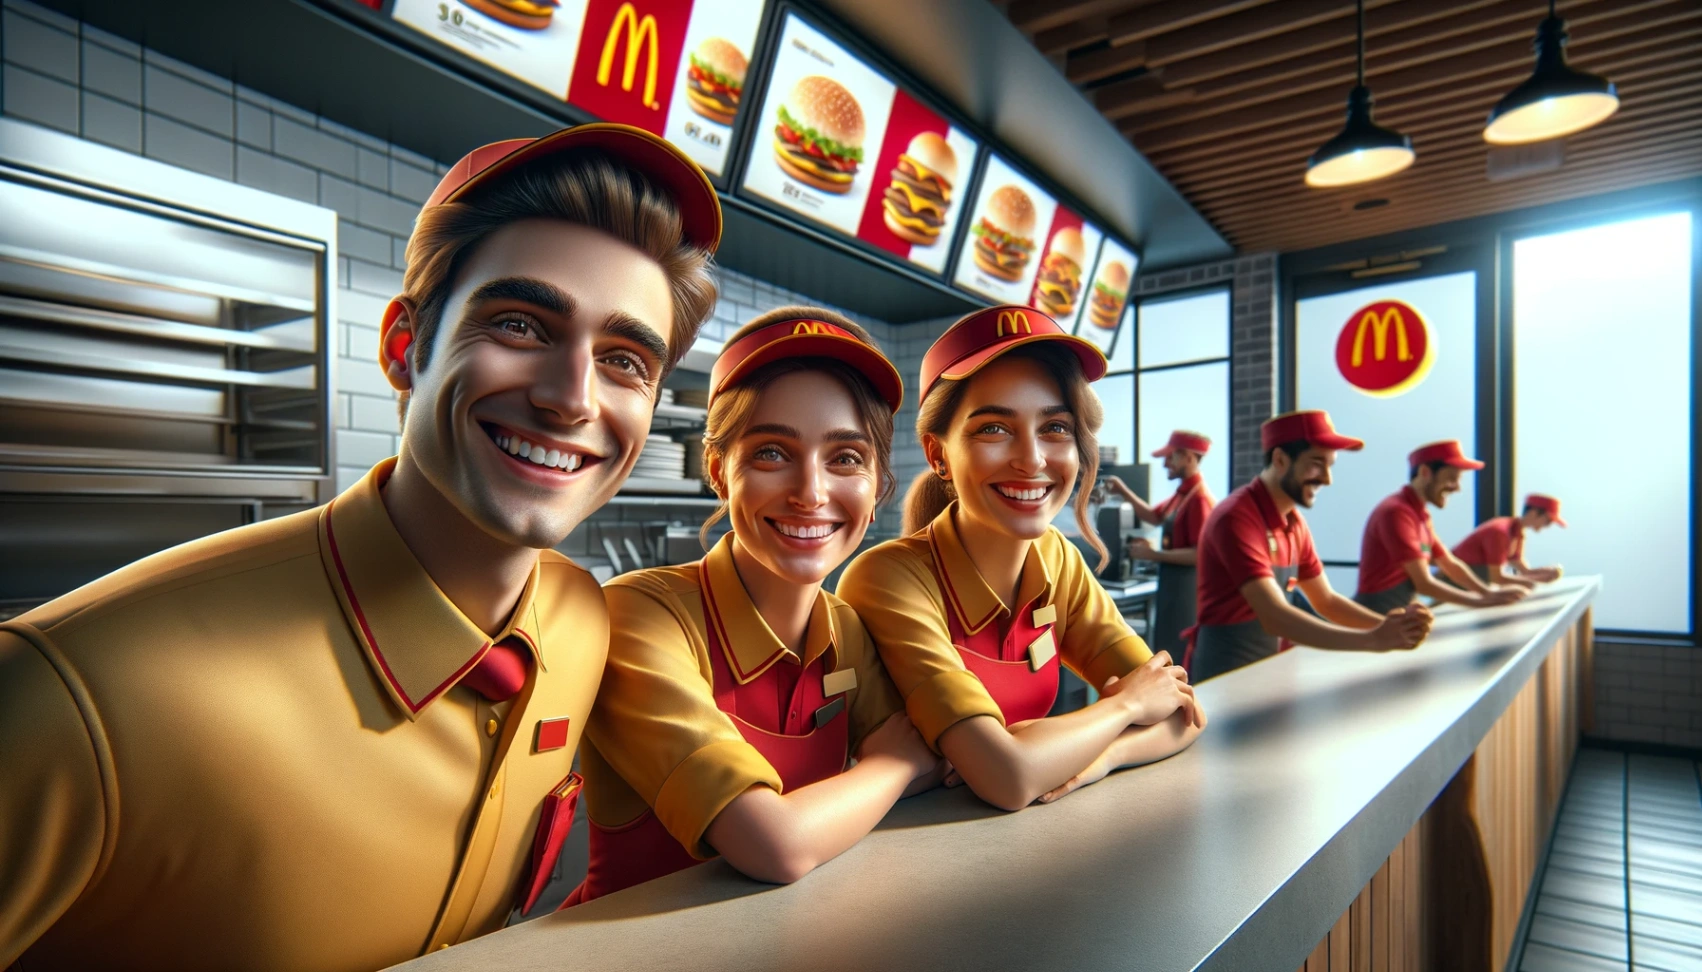 Jobs at McDonald's: Learn How to Easily Apply Online